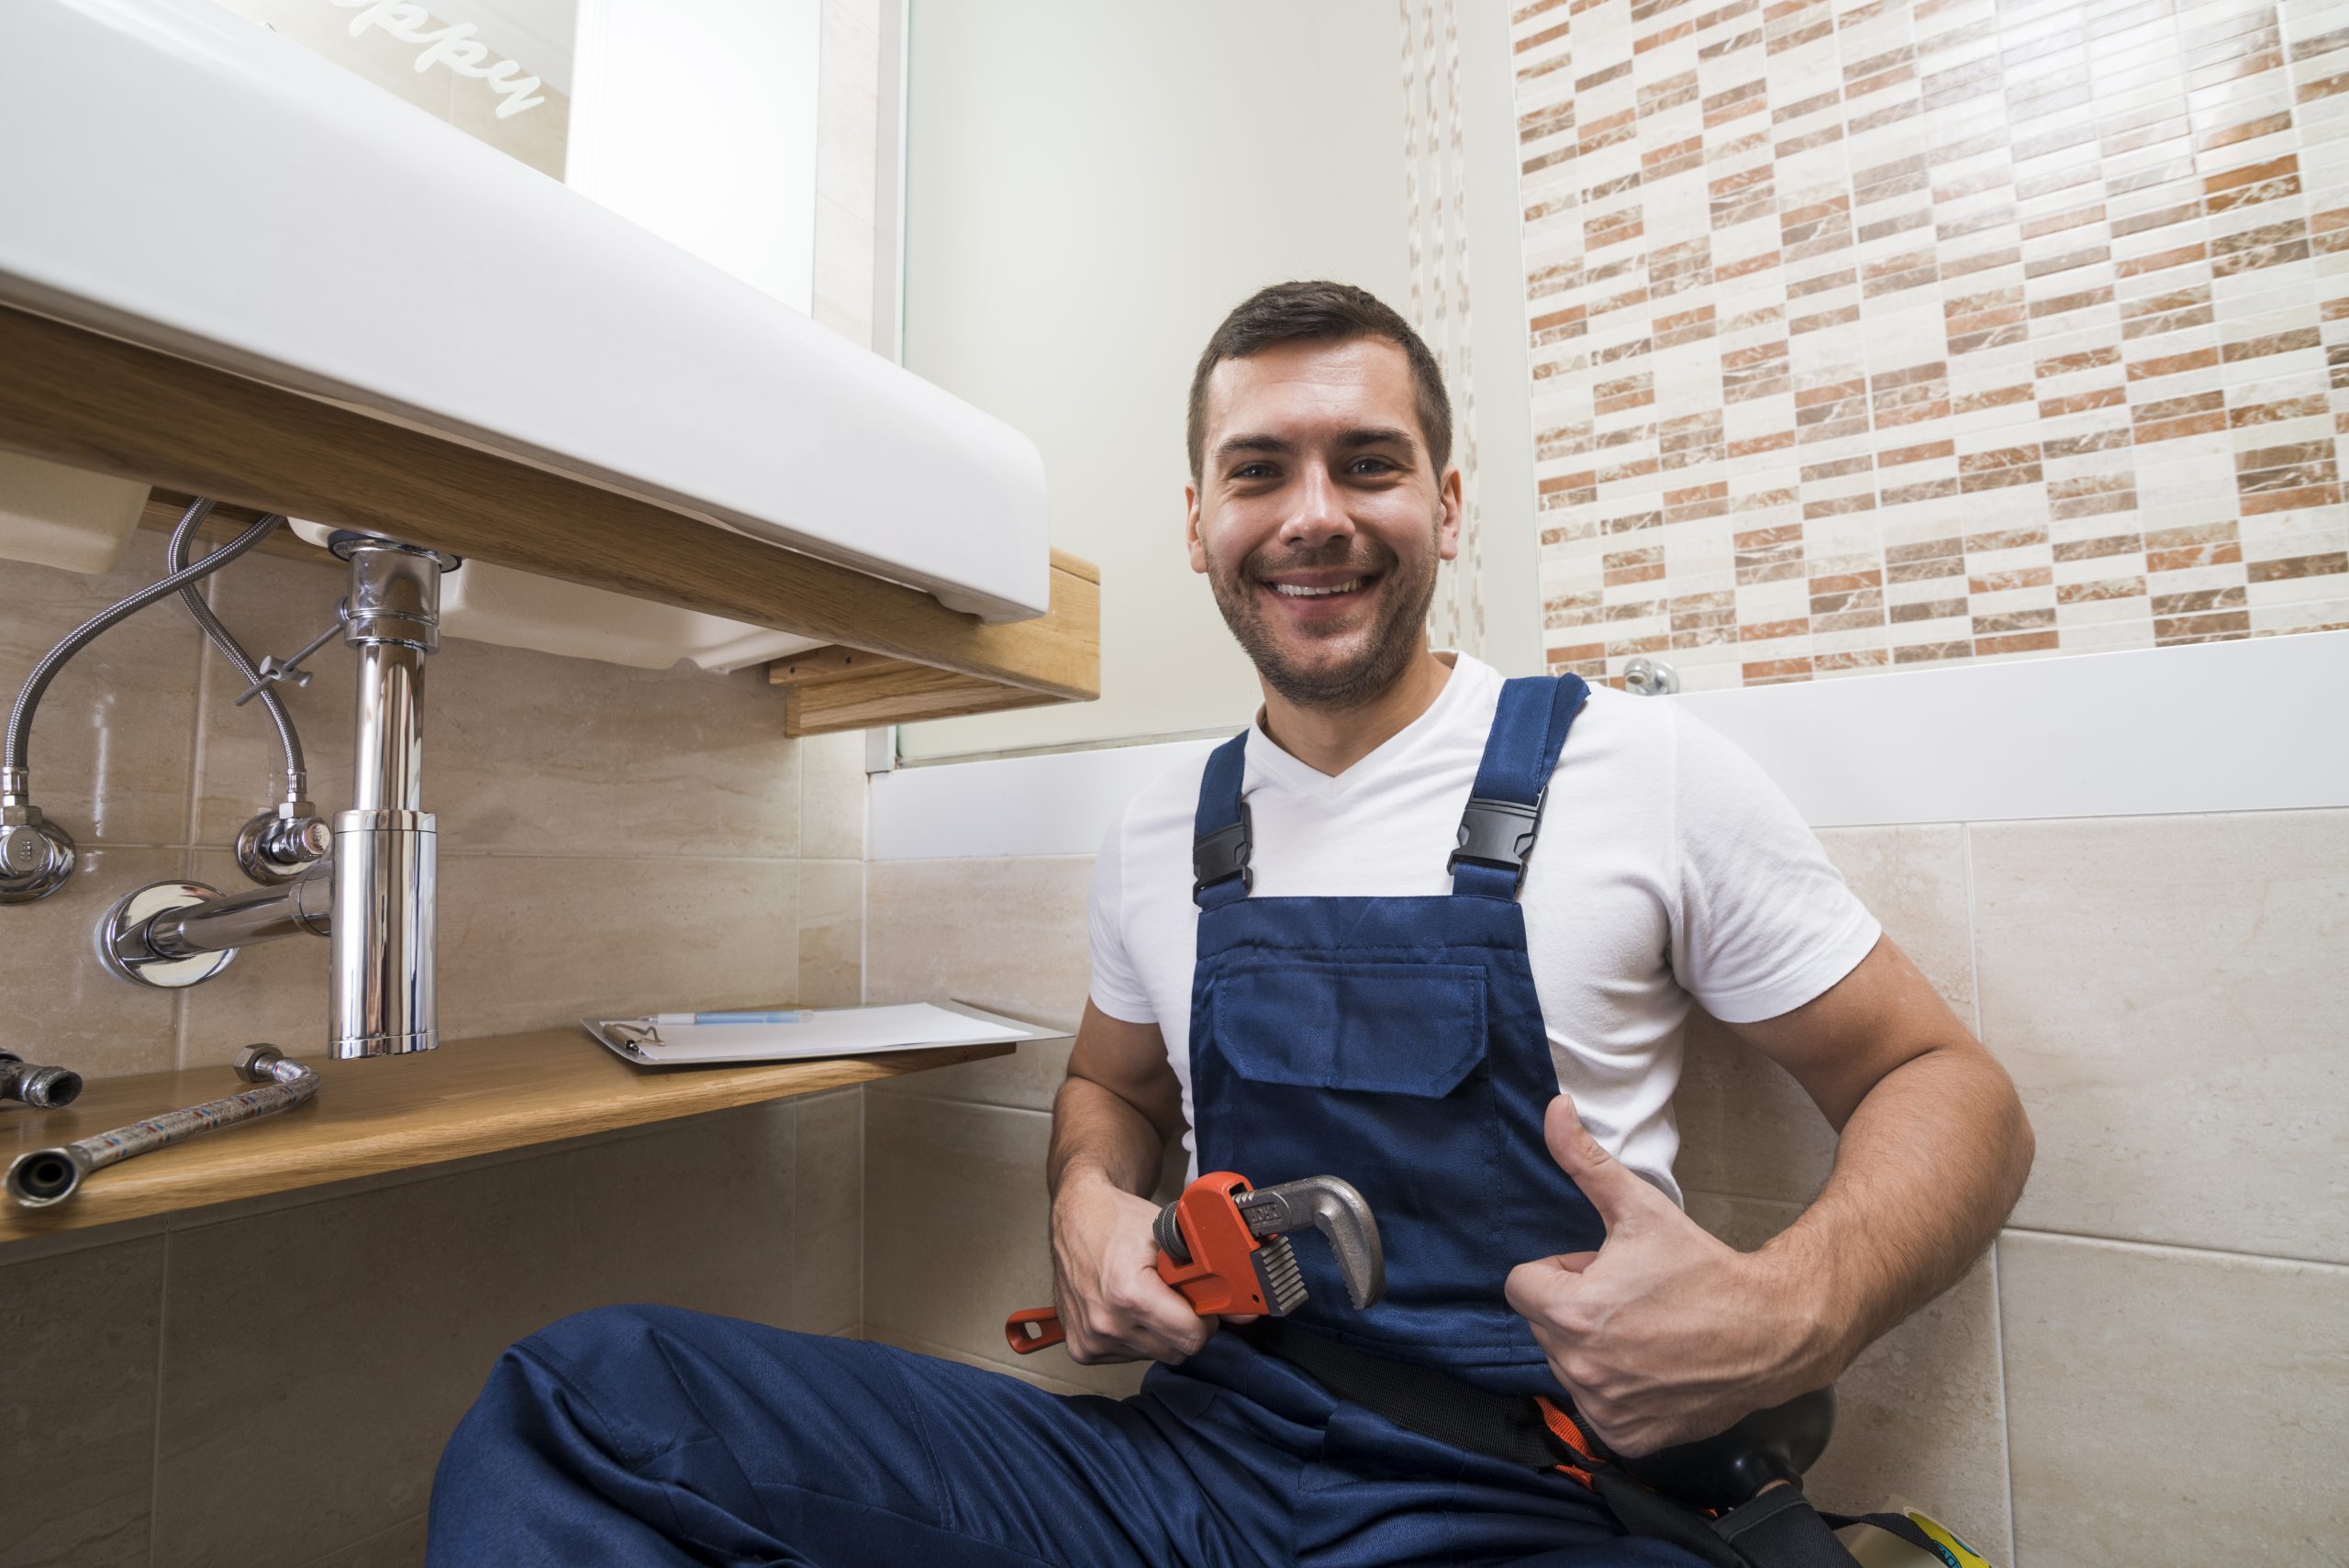 Emergency Plumber Los Angeles – John Dawn at Your Service